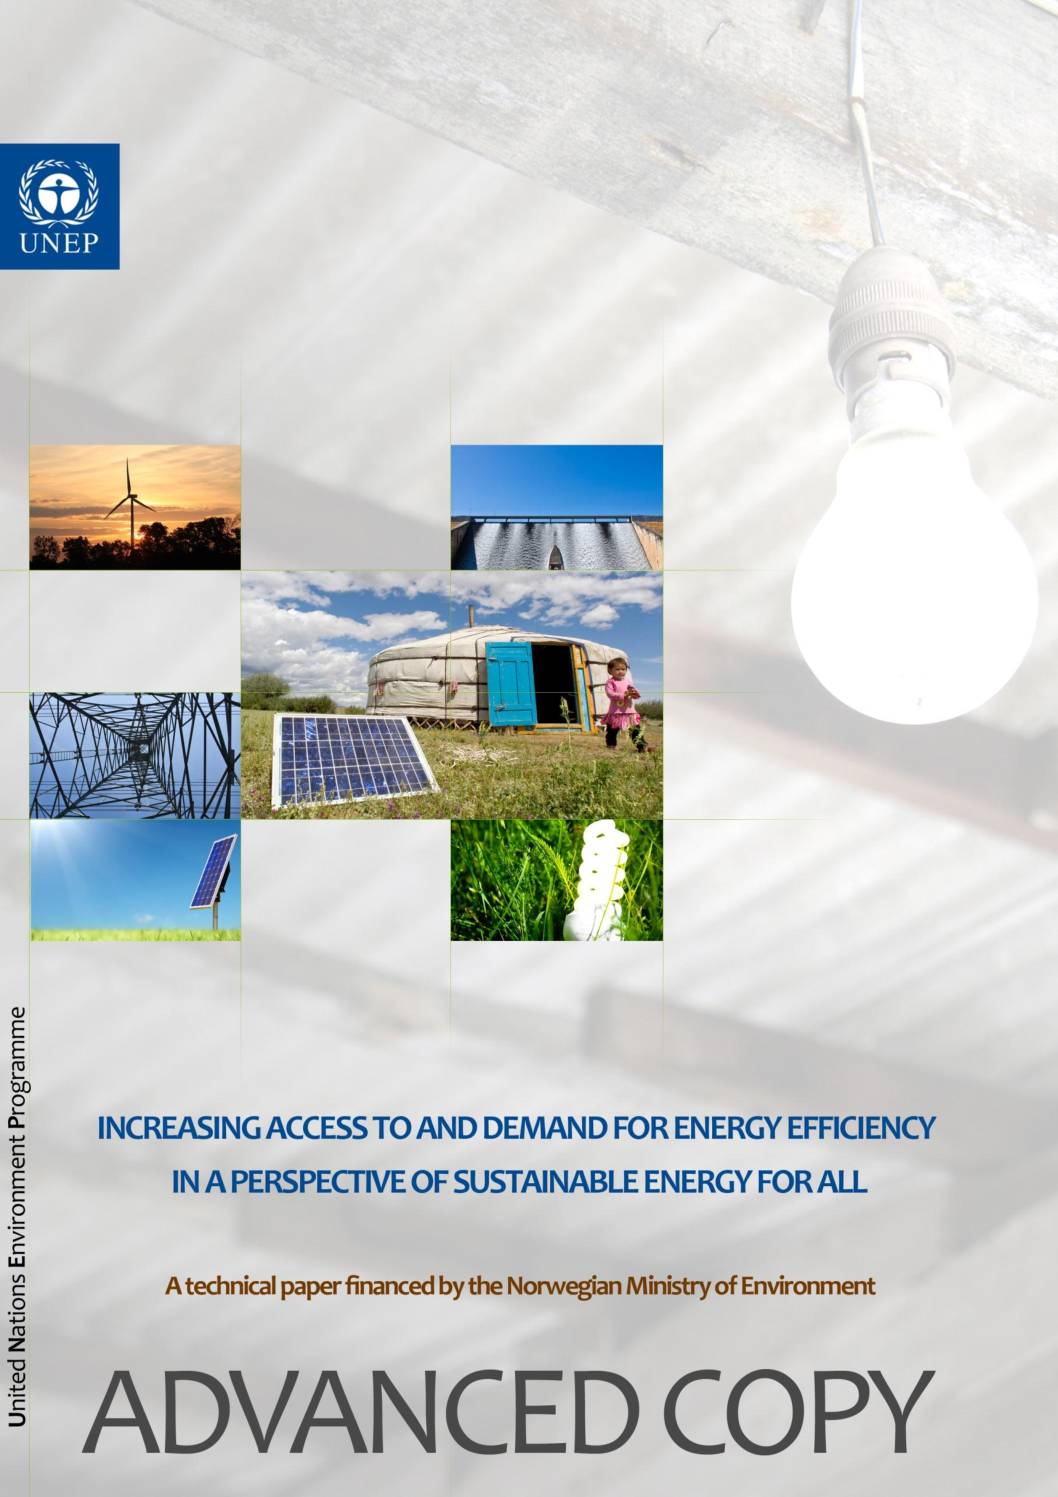 Increasing Access to and Demand for Energy Efficiency in a Perspective of Sustainable Energy for All